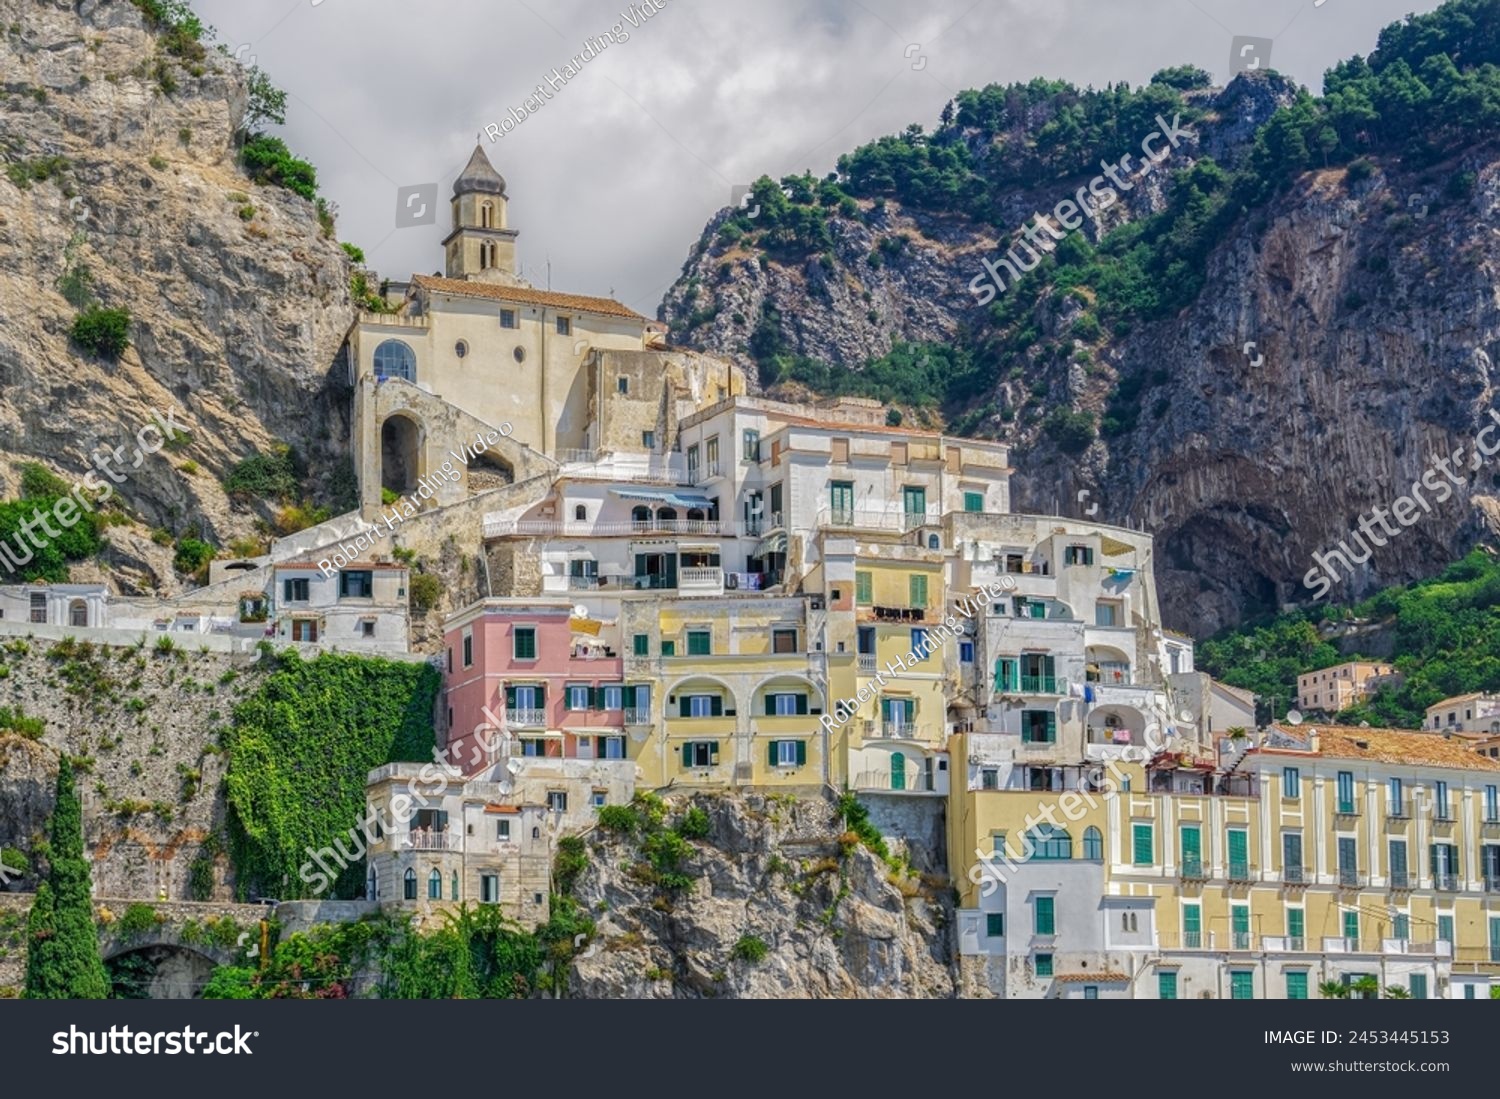 View of low-rise traditional buildings and cliffs along the coastline in Costiera Amalfitana (Amalfi Coast), UNESCO World Heritage Site, Campania, Italy, Europe #2453445153